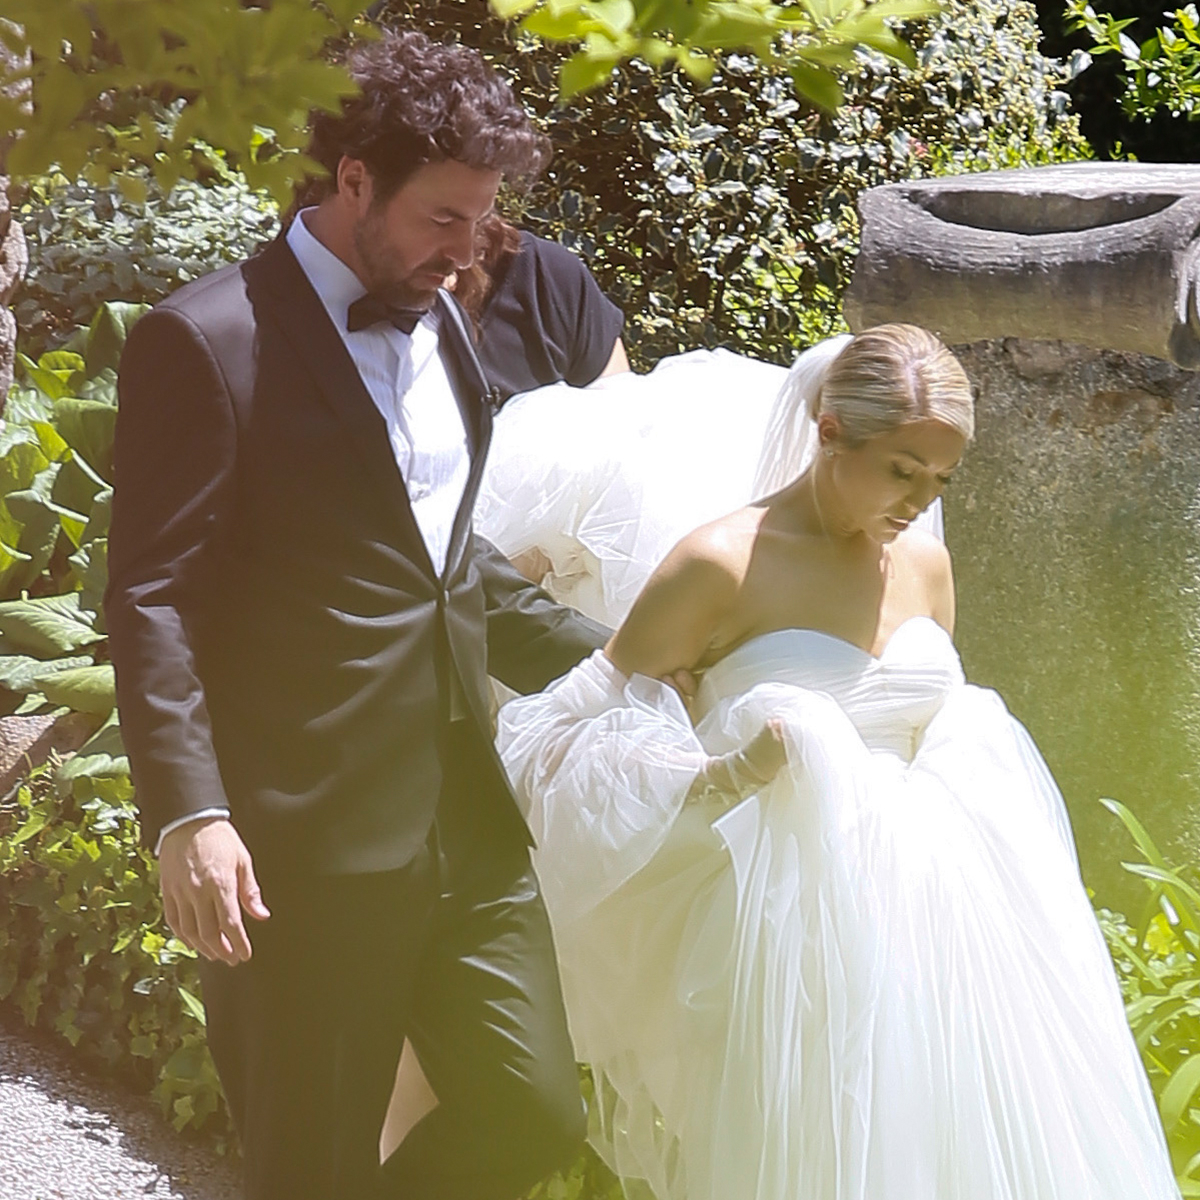 Stassi Schroeder and Beau Clark Get Married Again in Italy